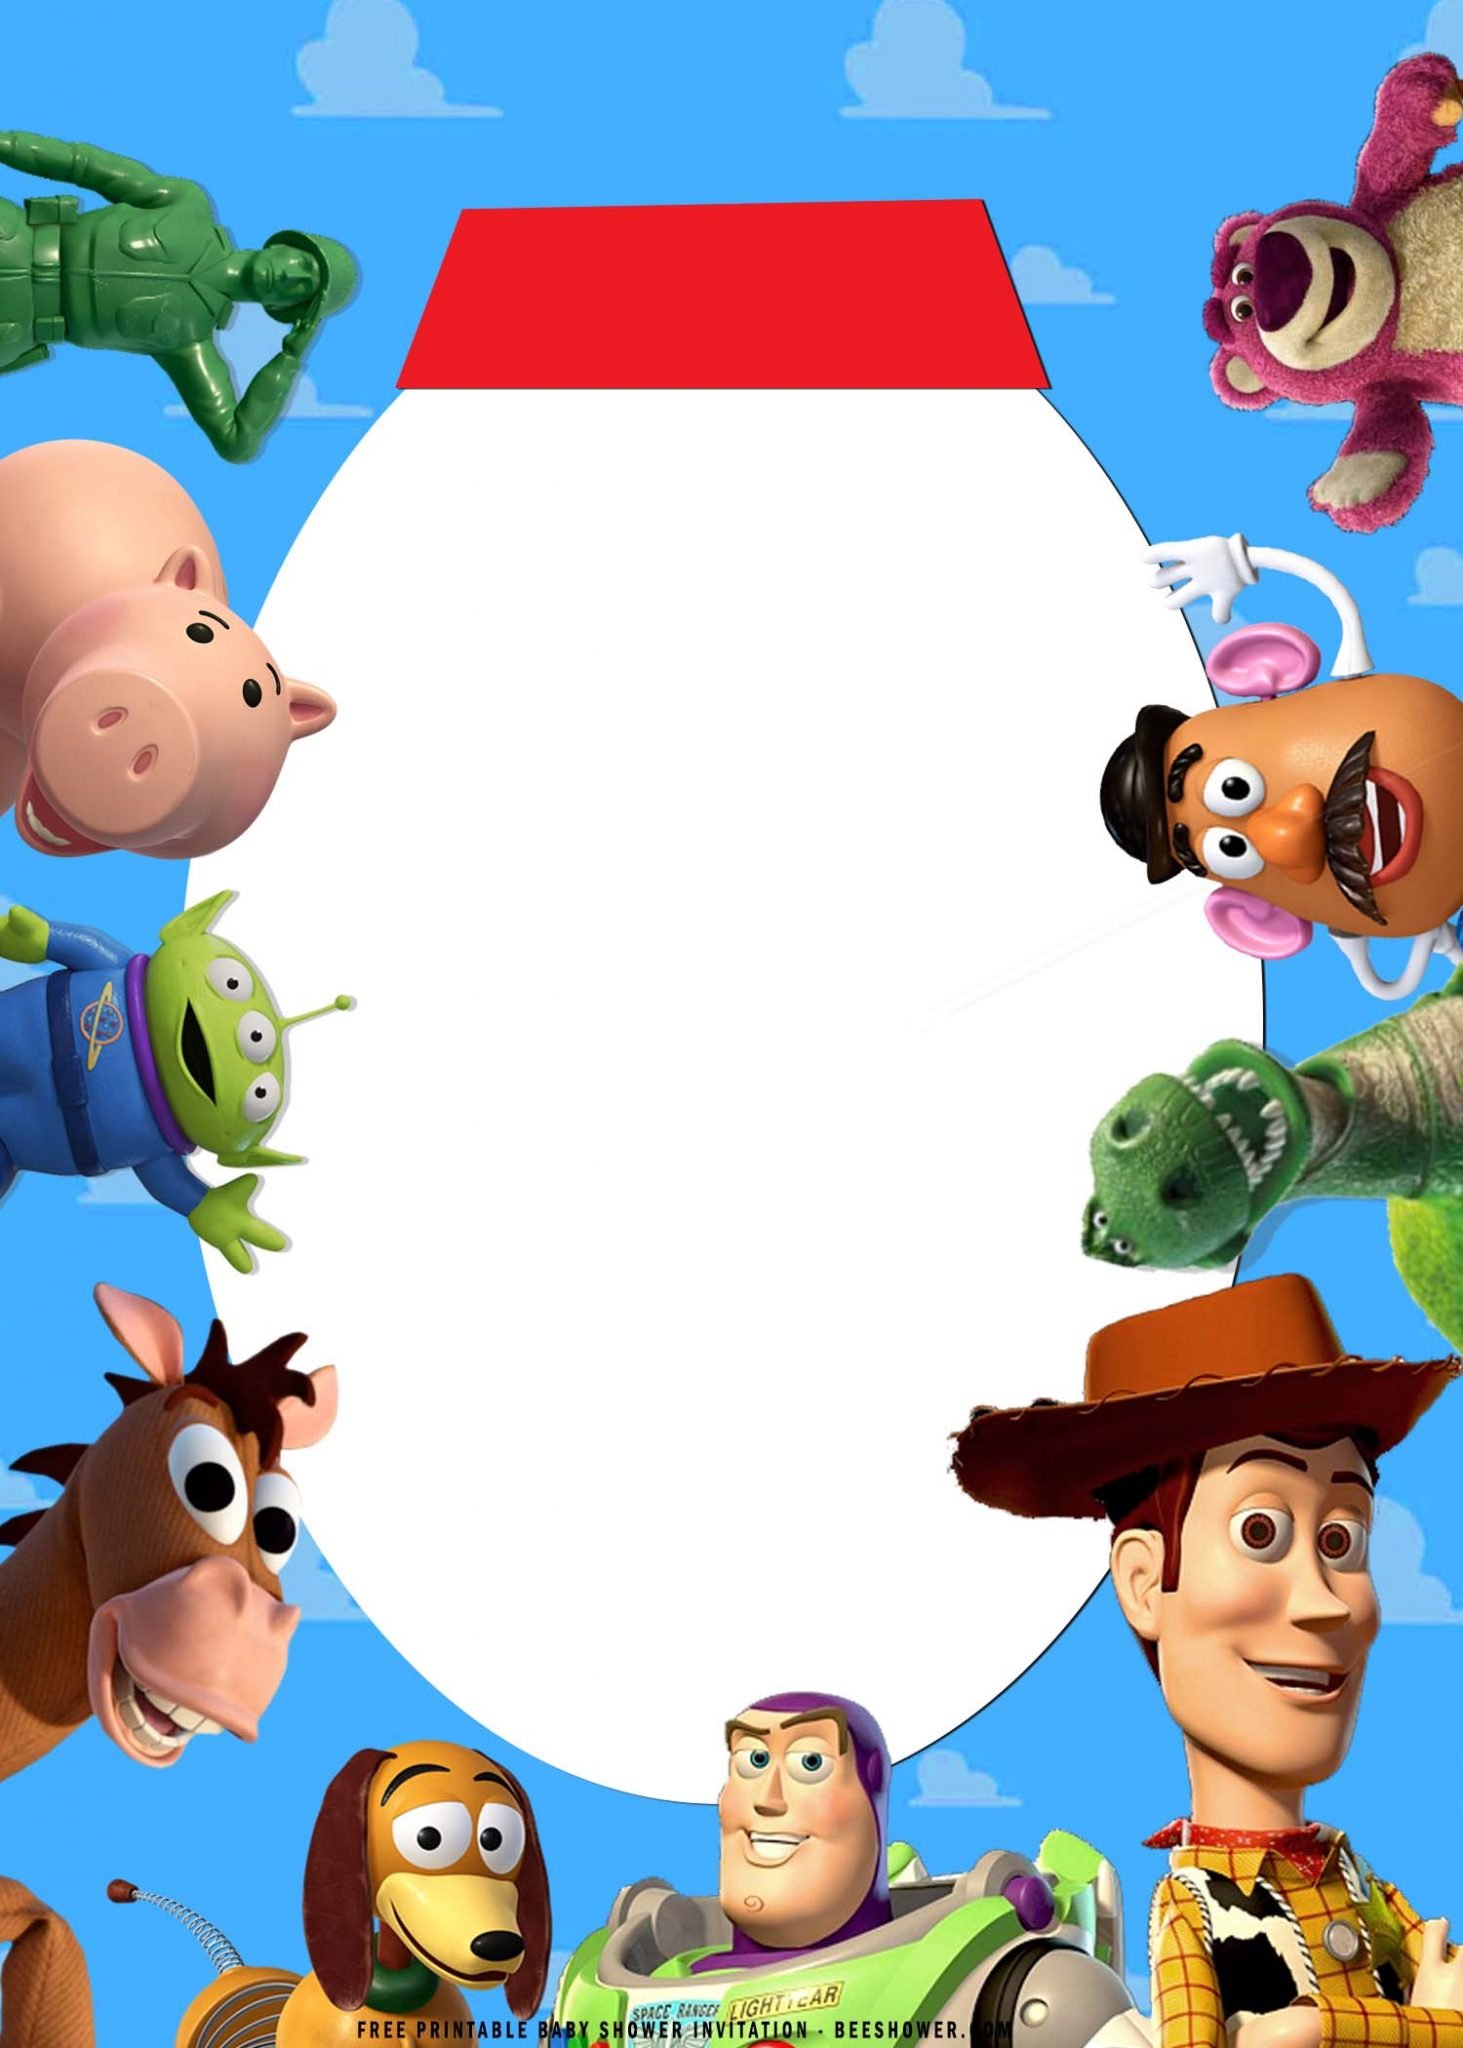 Toy Story Invitations Free Template